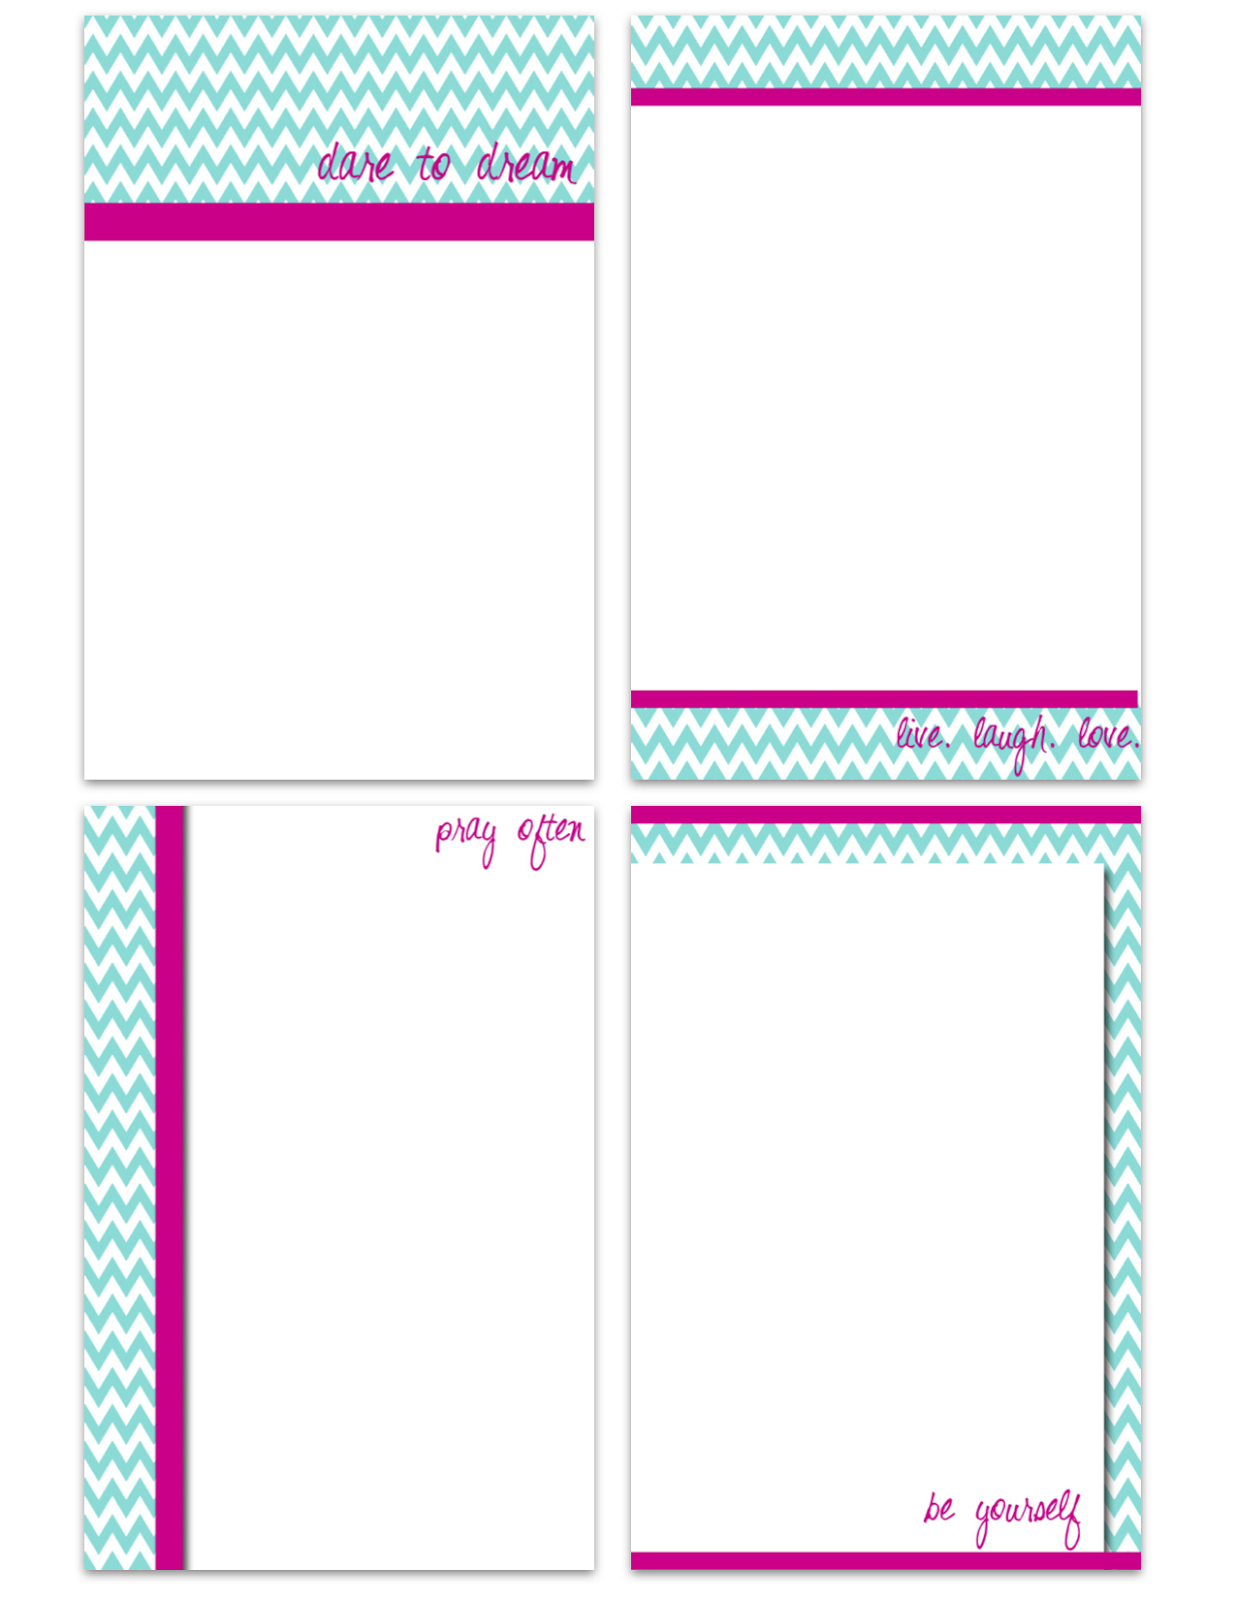 my-fashionable-designs-free-printable-notecards-teal-chevron